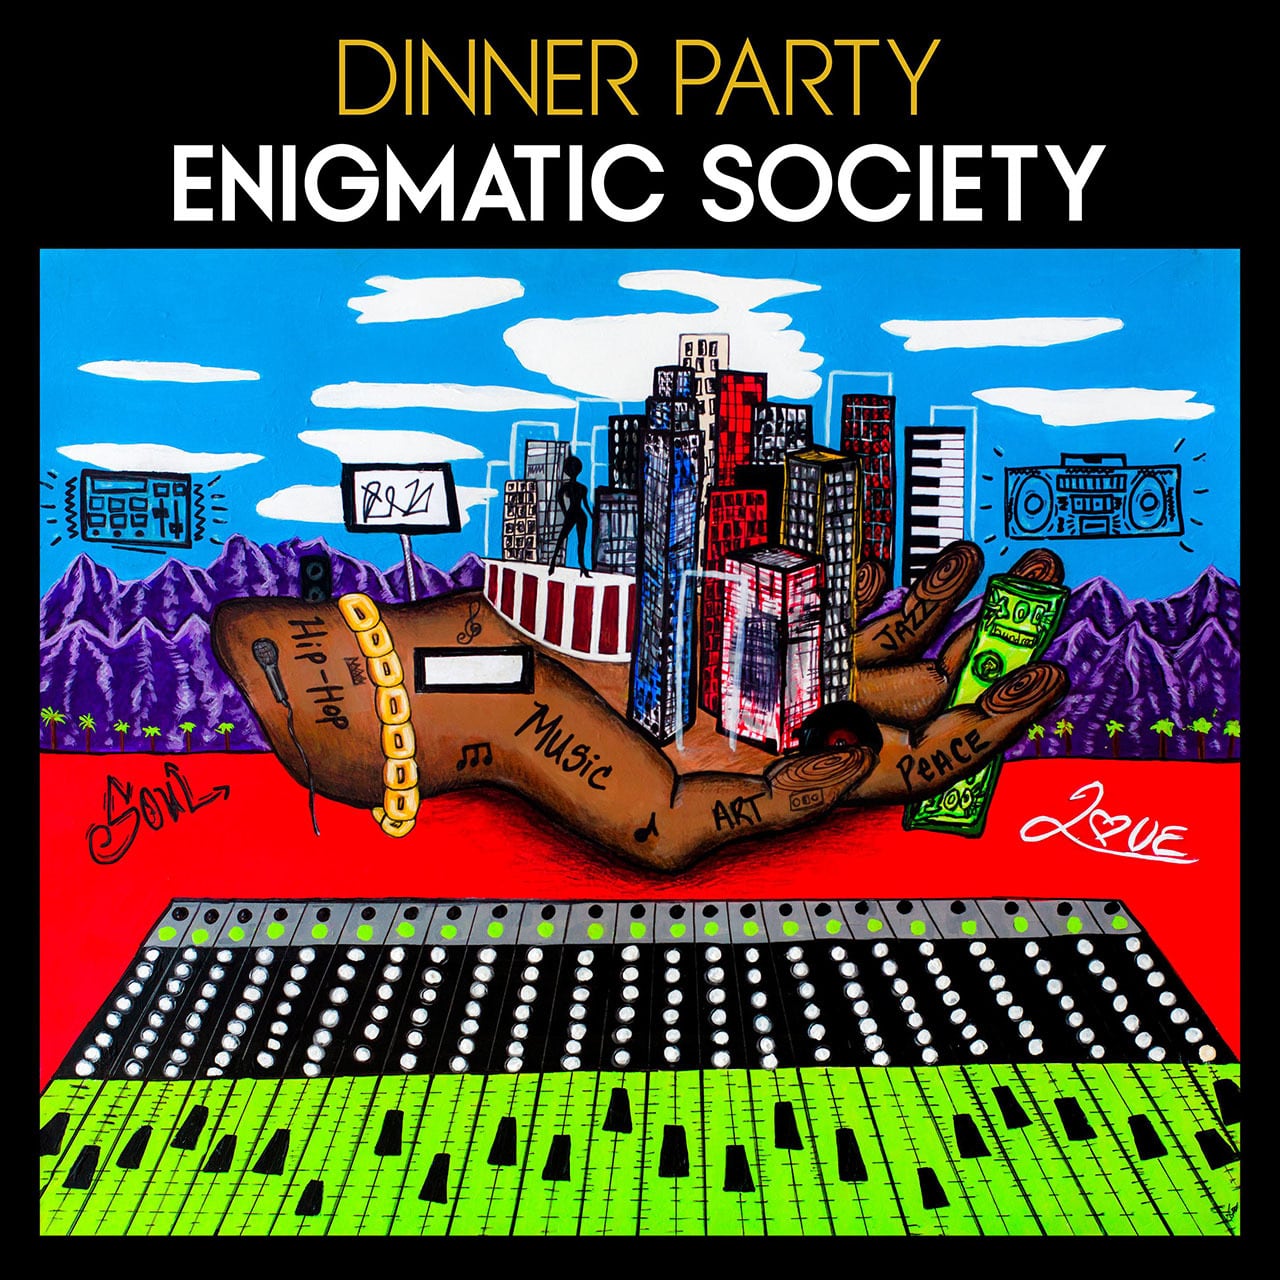 【LP】Dinner Party - Enigmatic Society（ミルキー クリア ヴァイナル／日本限定仕様）